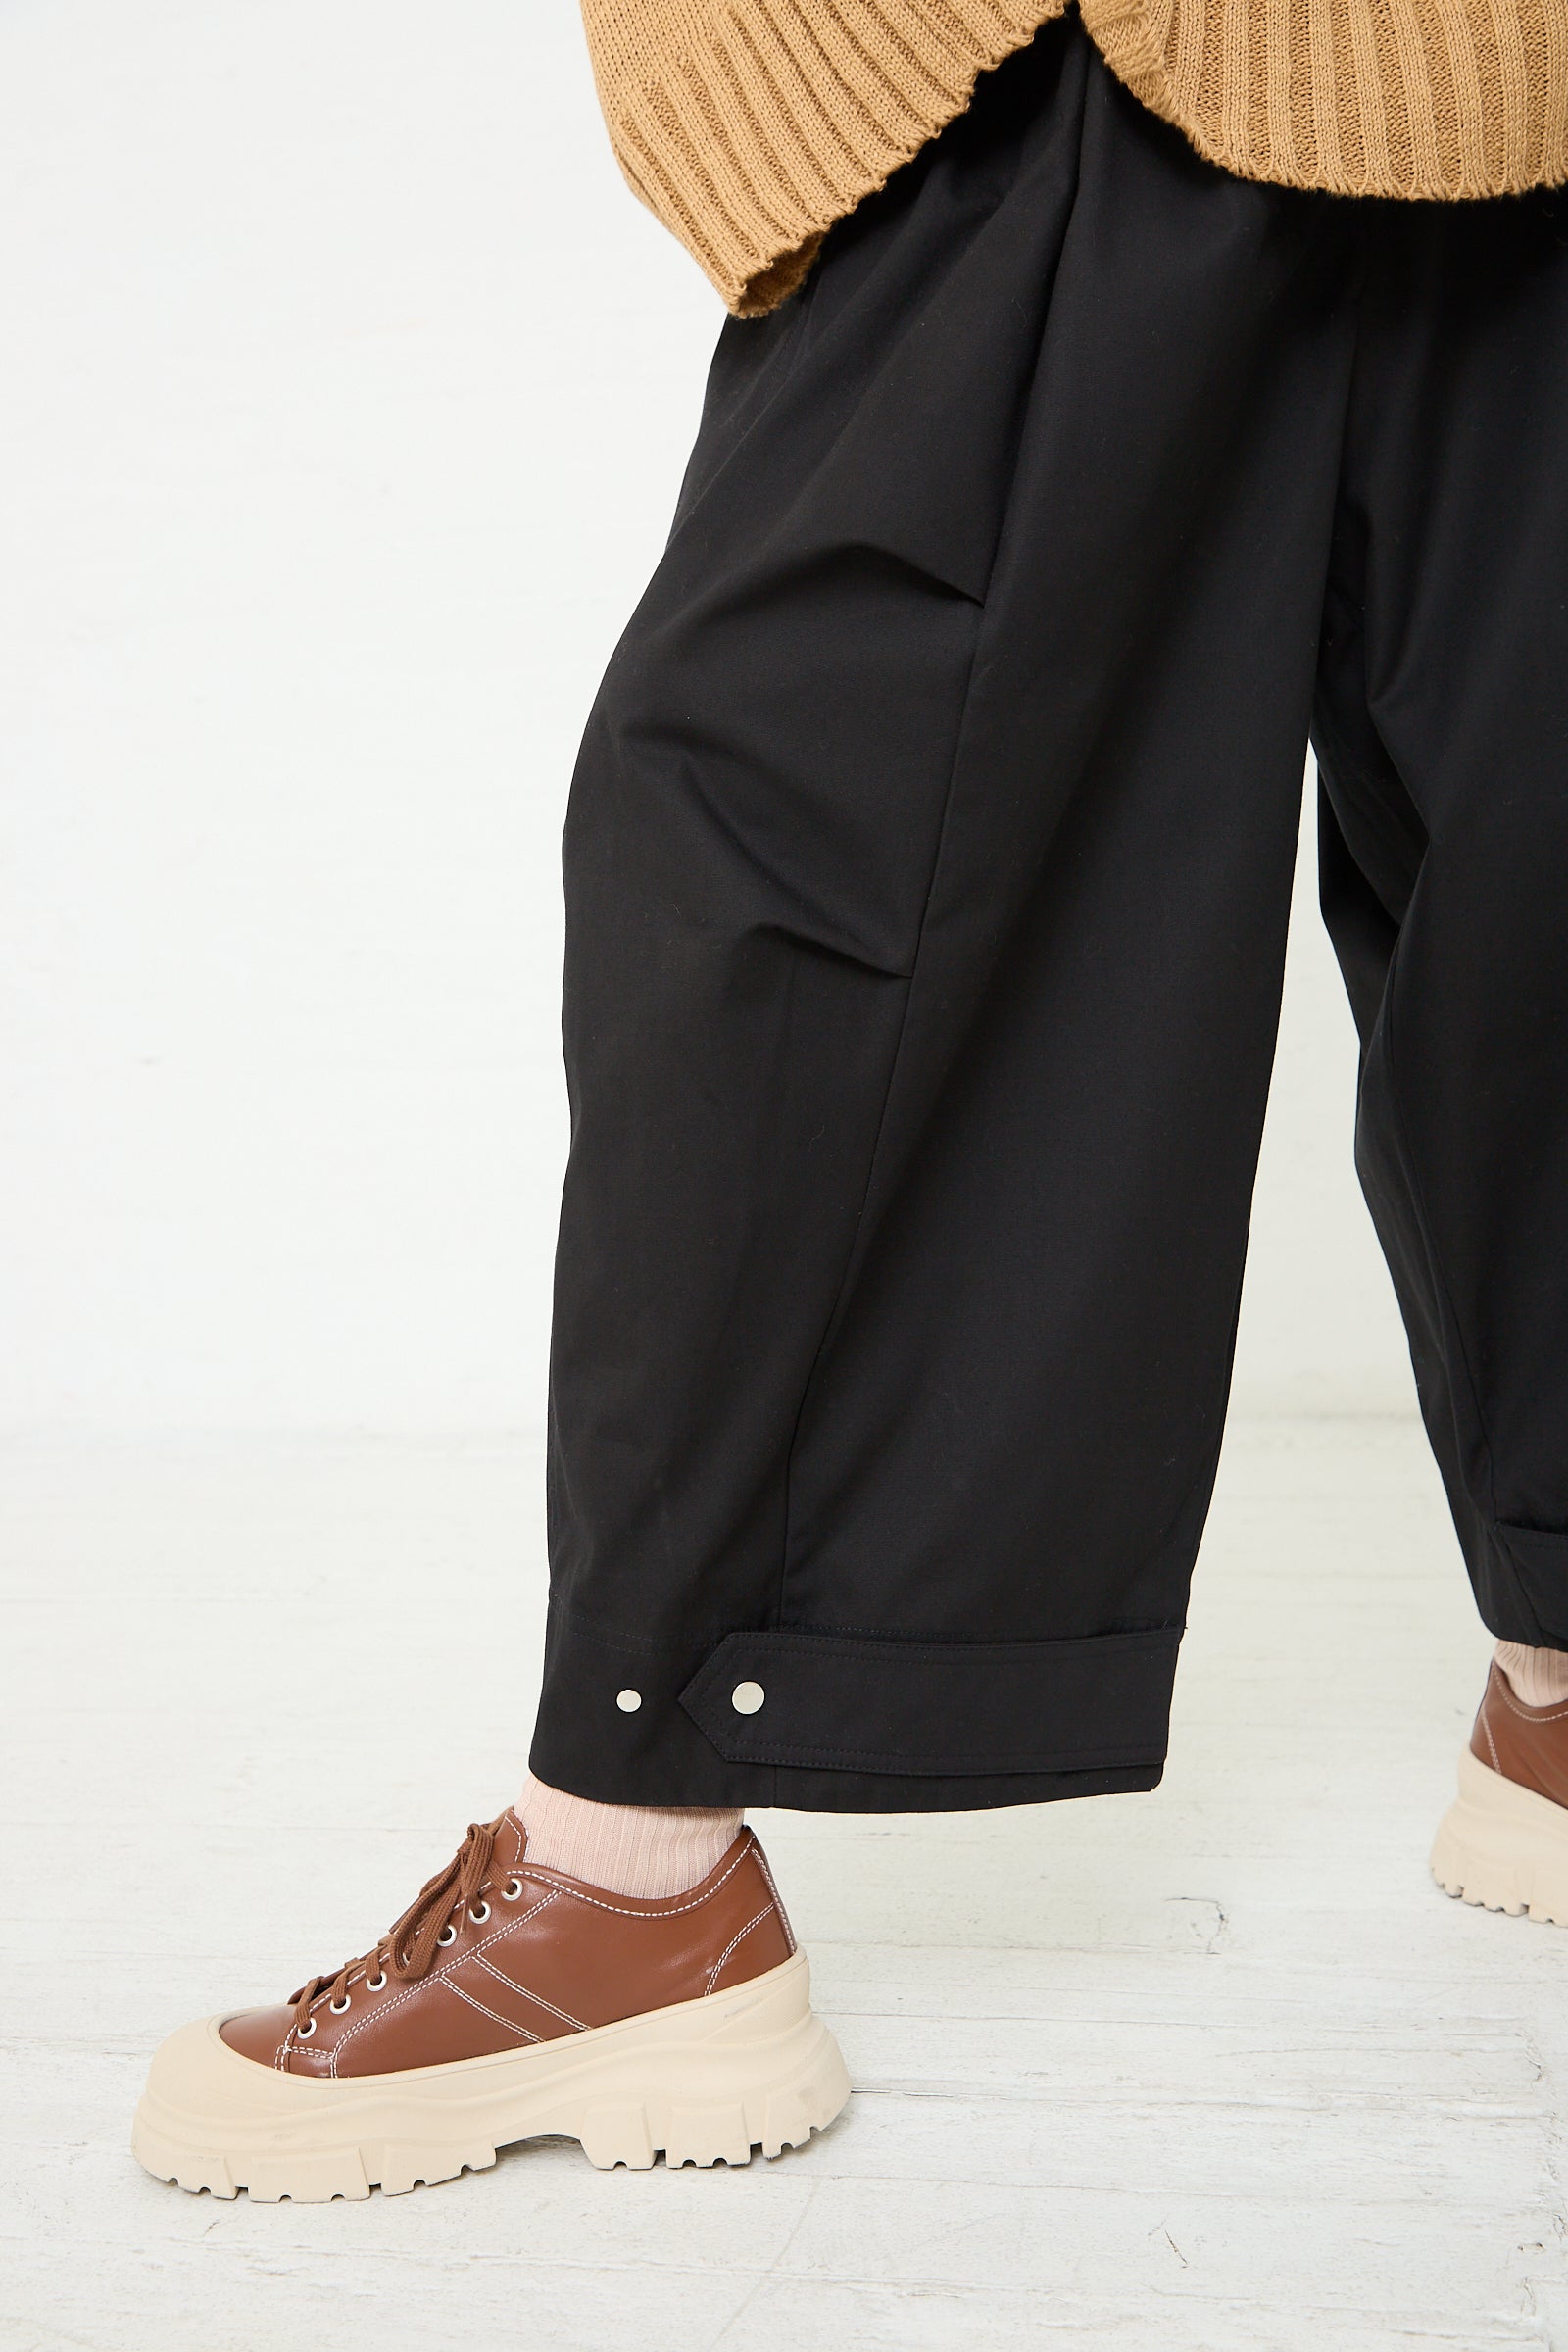 A woman wearing the Niccolò Pasqualetti Cotton Twill Luna Trouser in Black and a tan sweater. Up close view of pant.